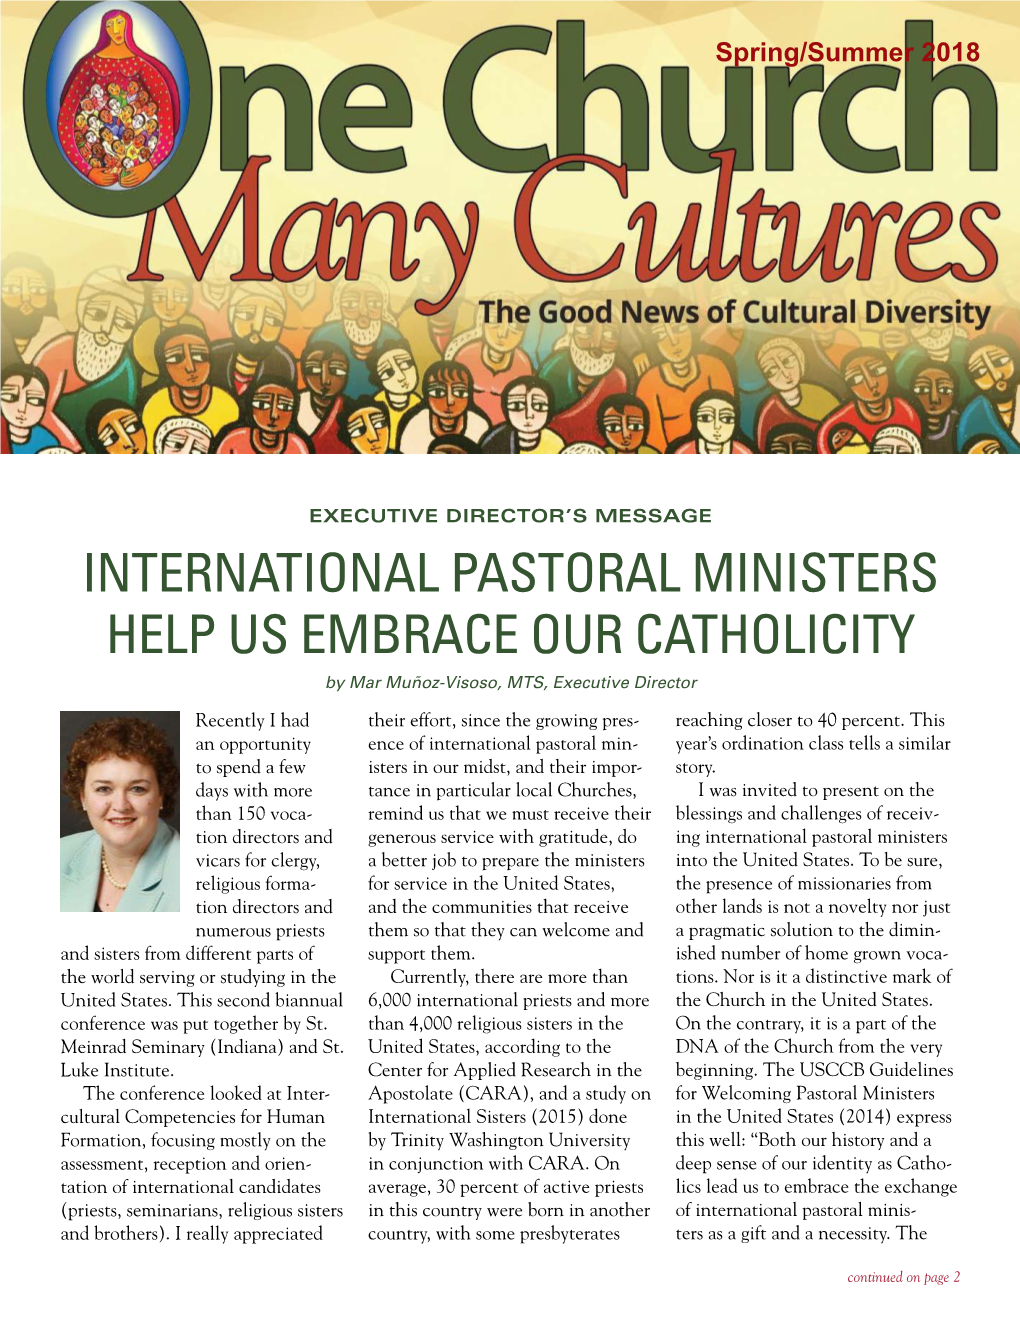 INTERNATIONAL PASTORAL MINISTERS HELP US EMBRACE OUR CATHOLICITY by Mar Muñoz-Visoso, MTS, Executive Director